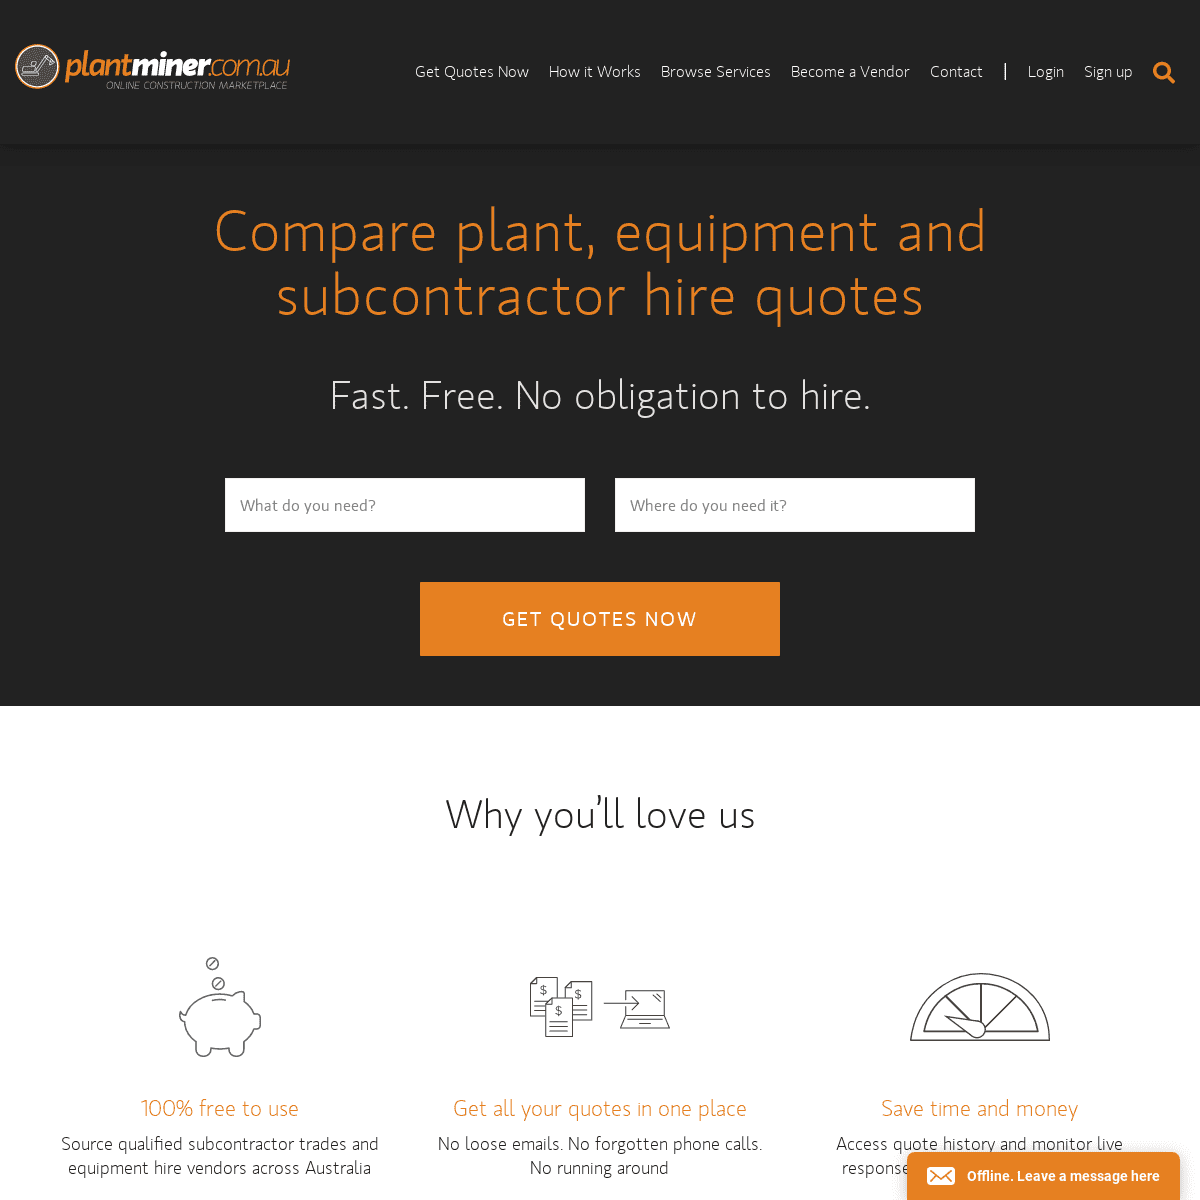 Get quotes for equipment and contractor hire - PlantMiner.com.au